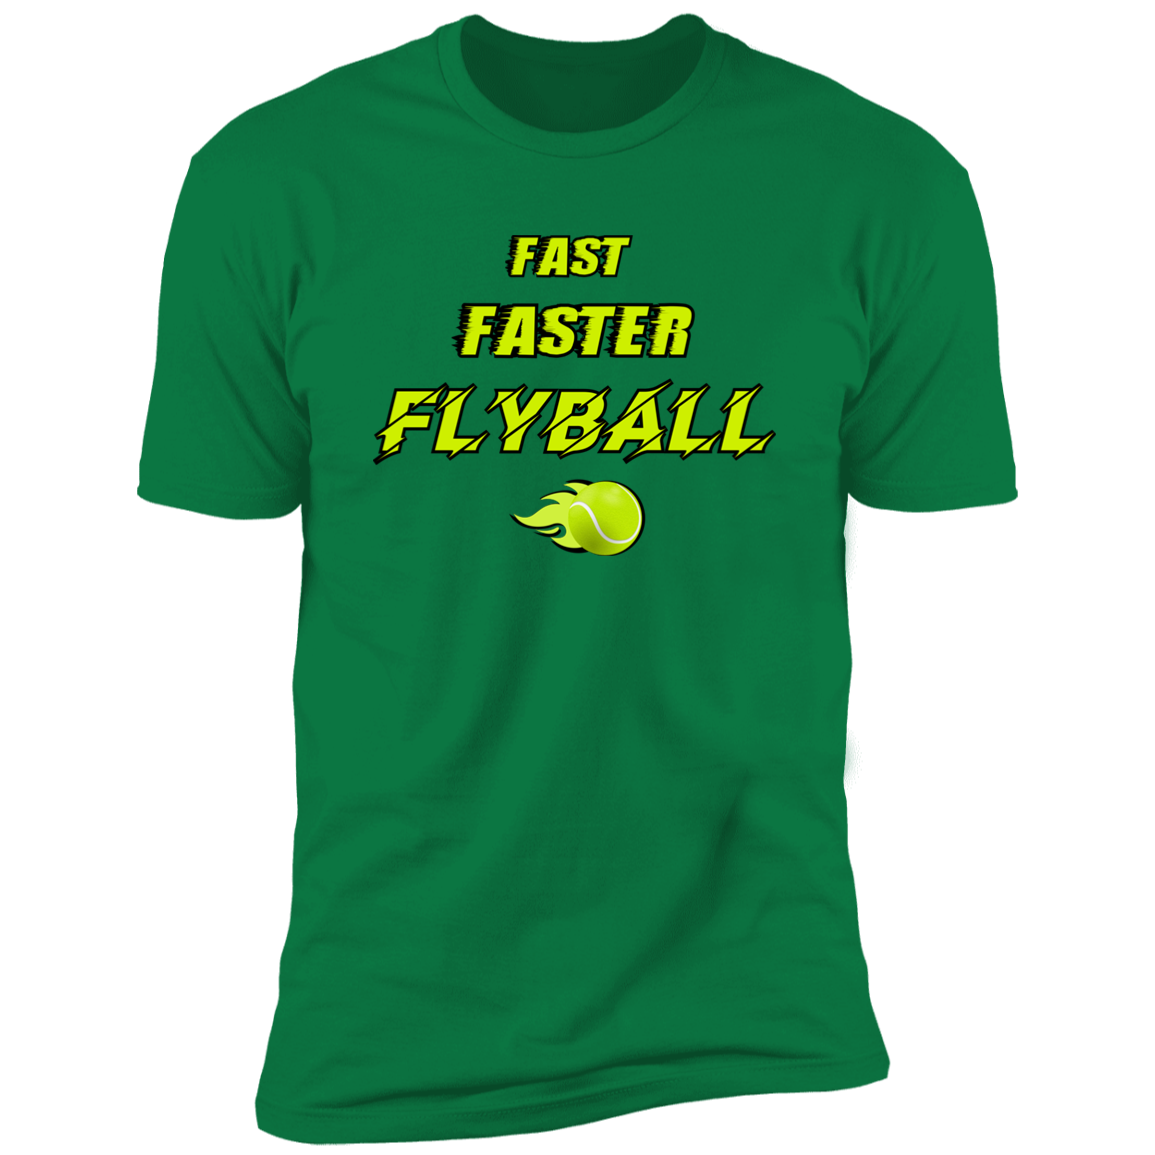 Fast Faster Flyball Dog T-shirt, sporting dog t-shirt, flyball t-shirt, in kelly green